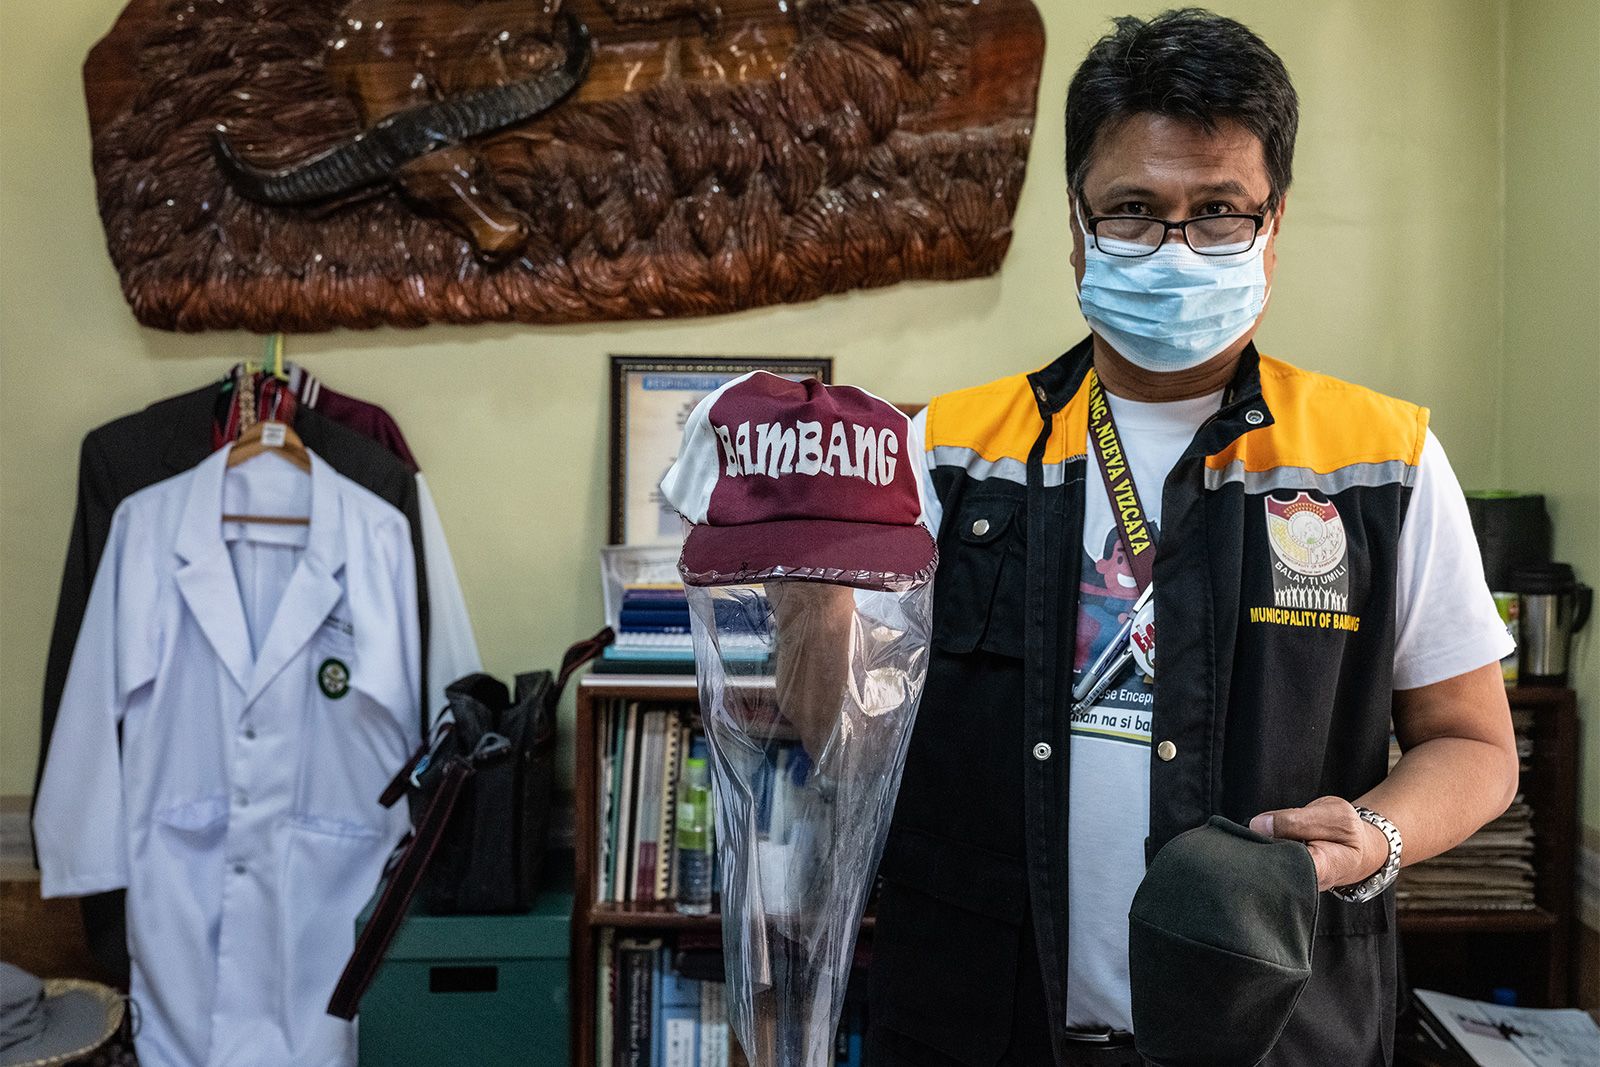 Dr. Anthony Cortez shows the temporary face protection equipment he has made. He said medics are hoping for the new personal protective equipment. Image by Xyza Cruz Bacani. Philippines, 2020.